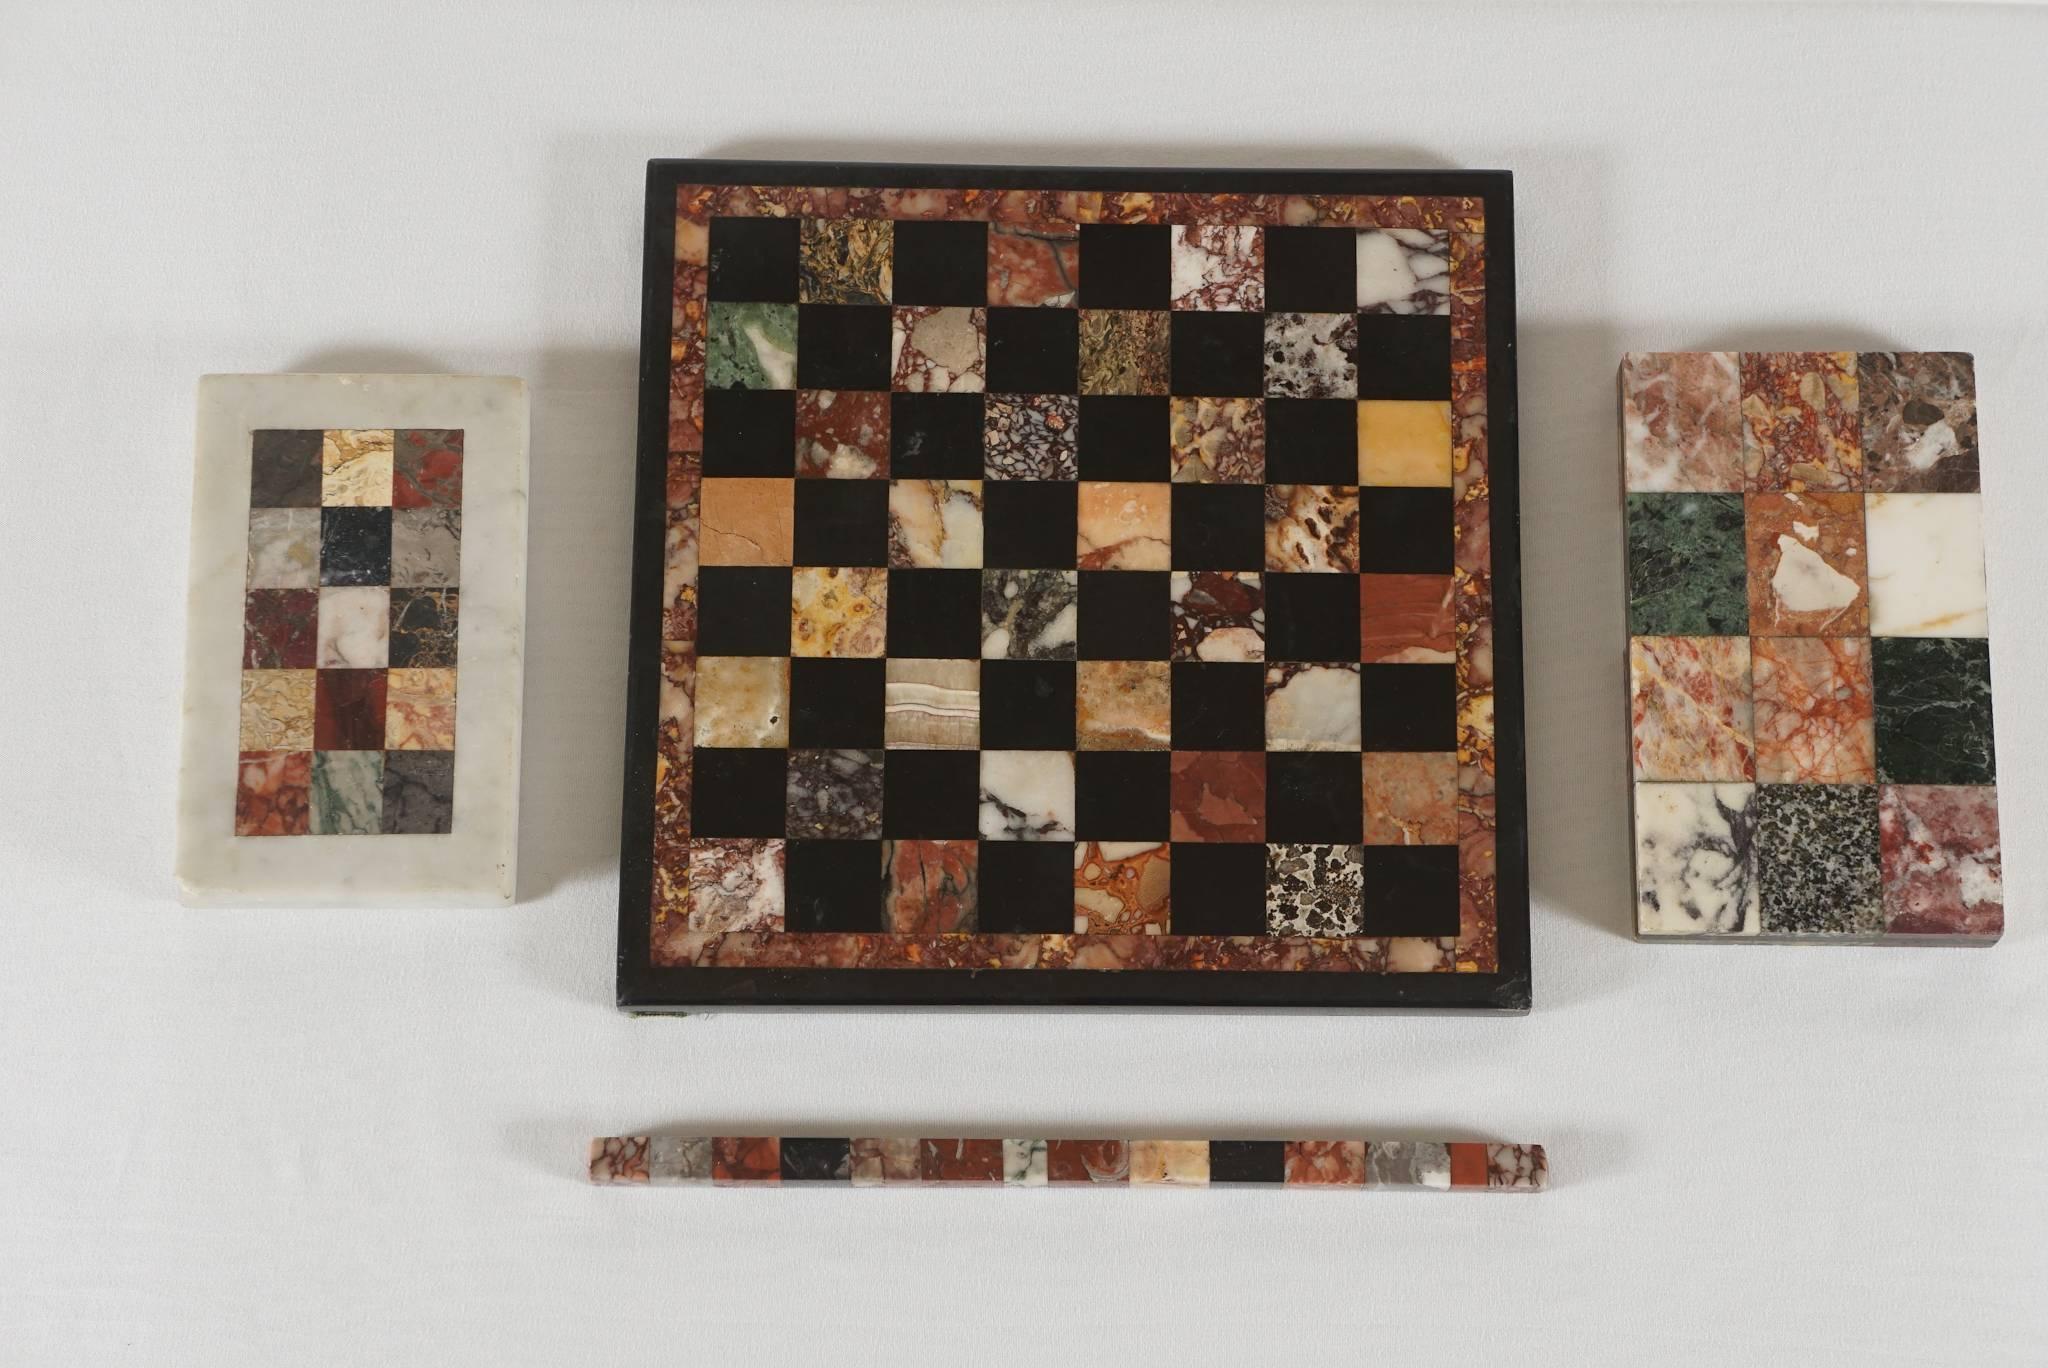 Wonderful collection of four 19th century Italian Grand Tour pietra dura specimen marble articles comprised of a game board, two paperweights, and a ruler or straight-edge, all with geometric inlay of rare and ancient marbles, including various